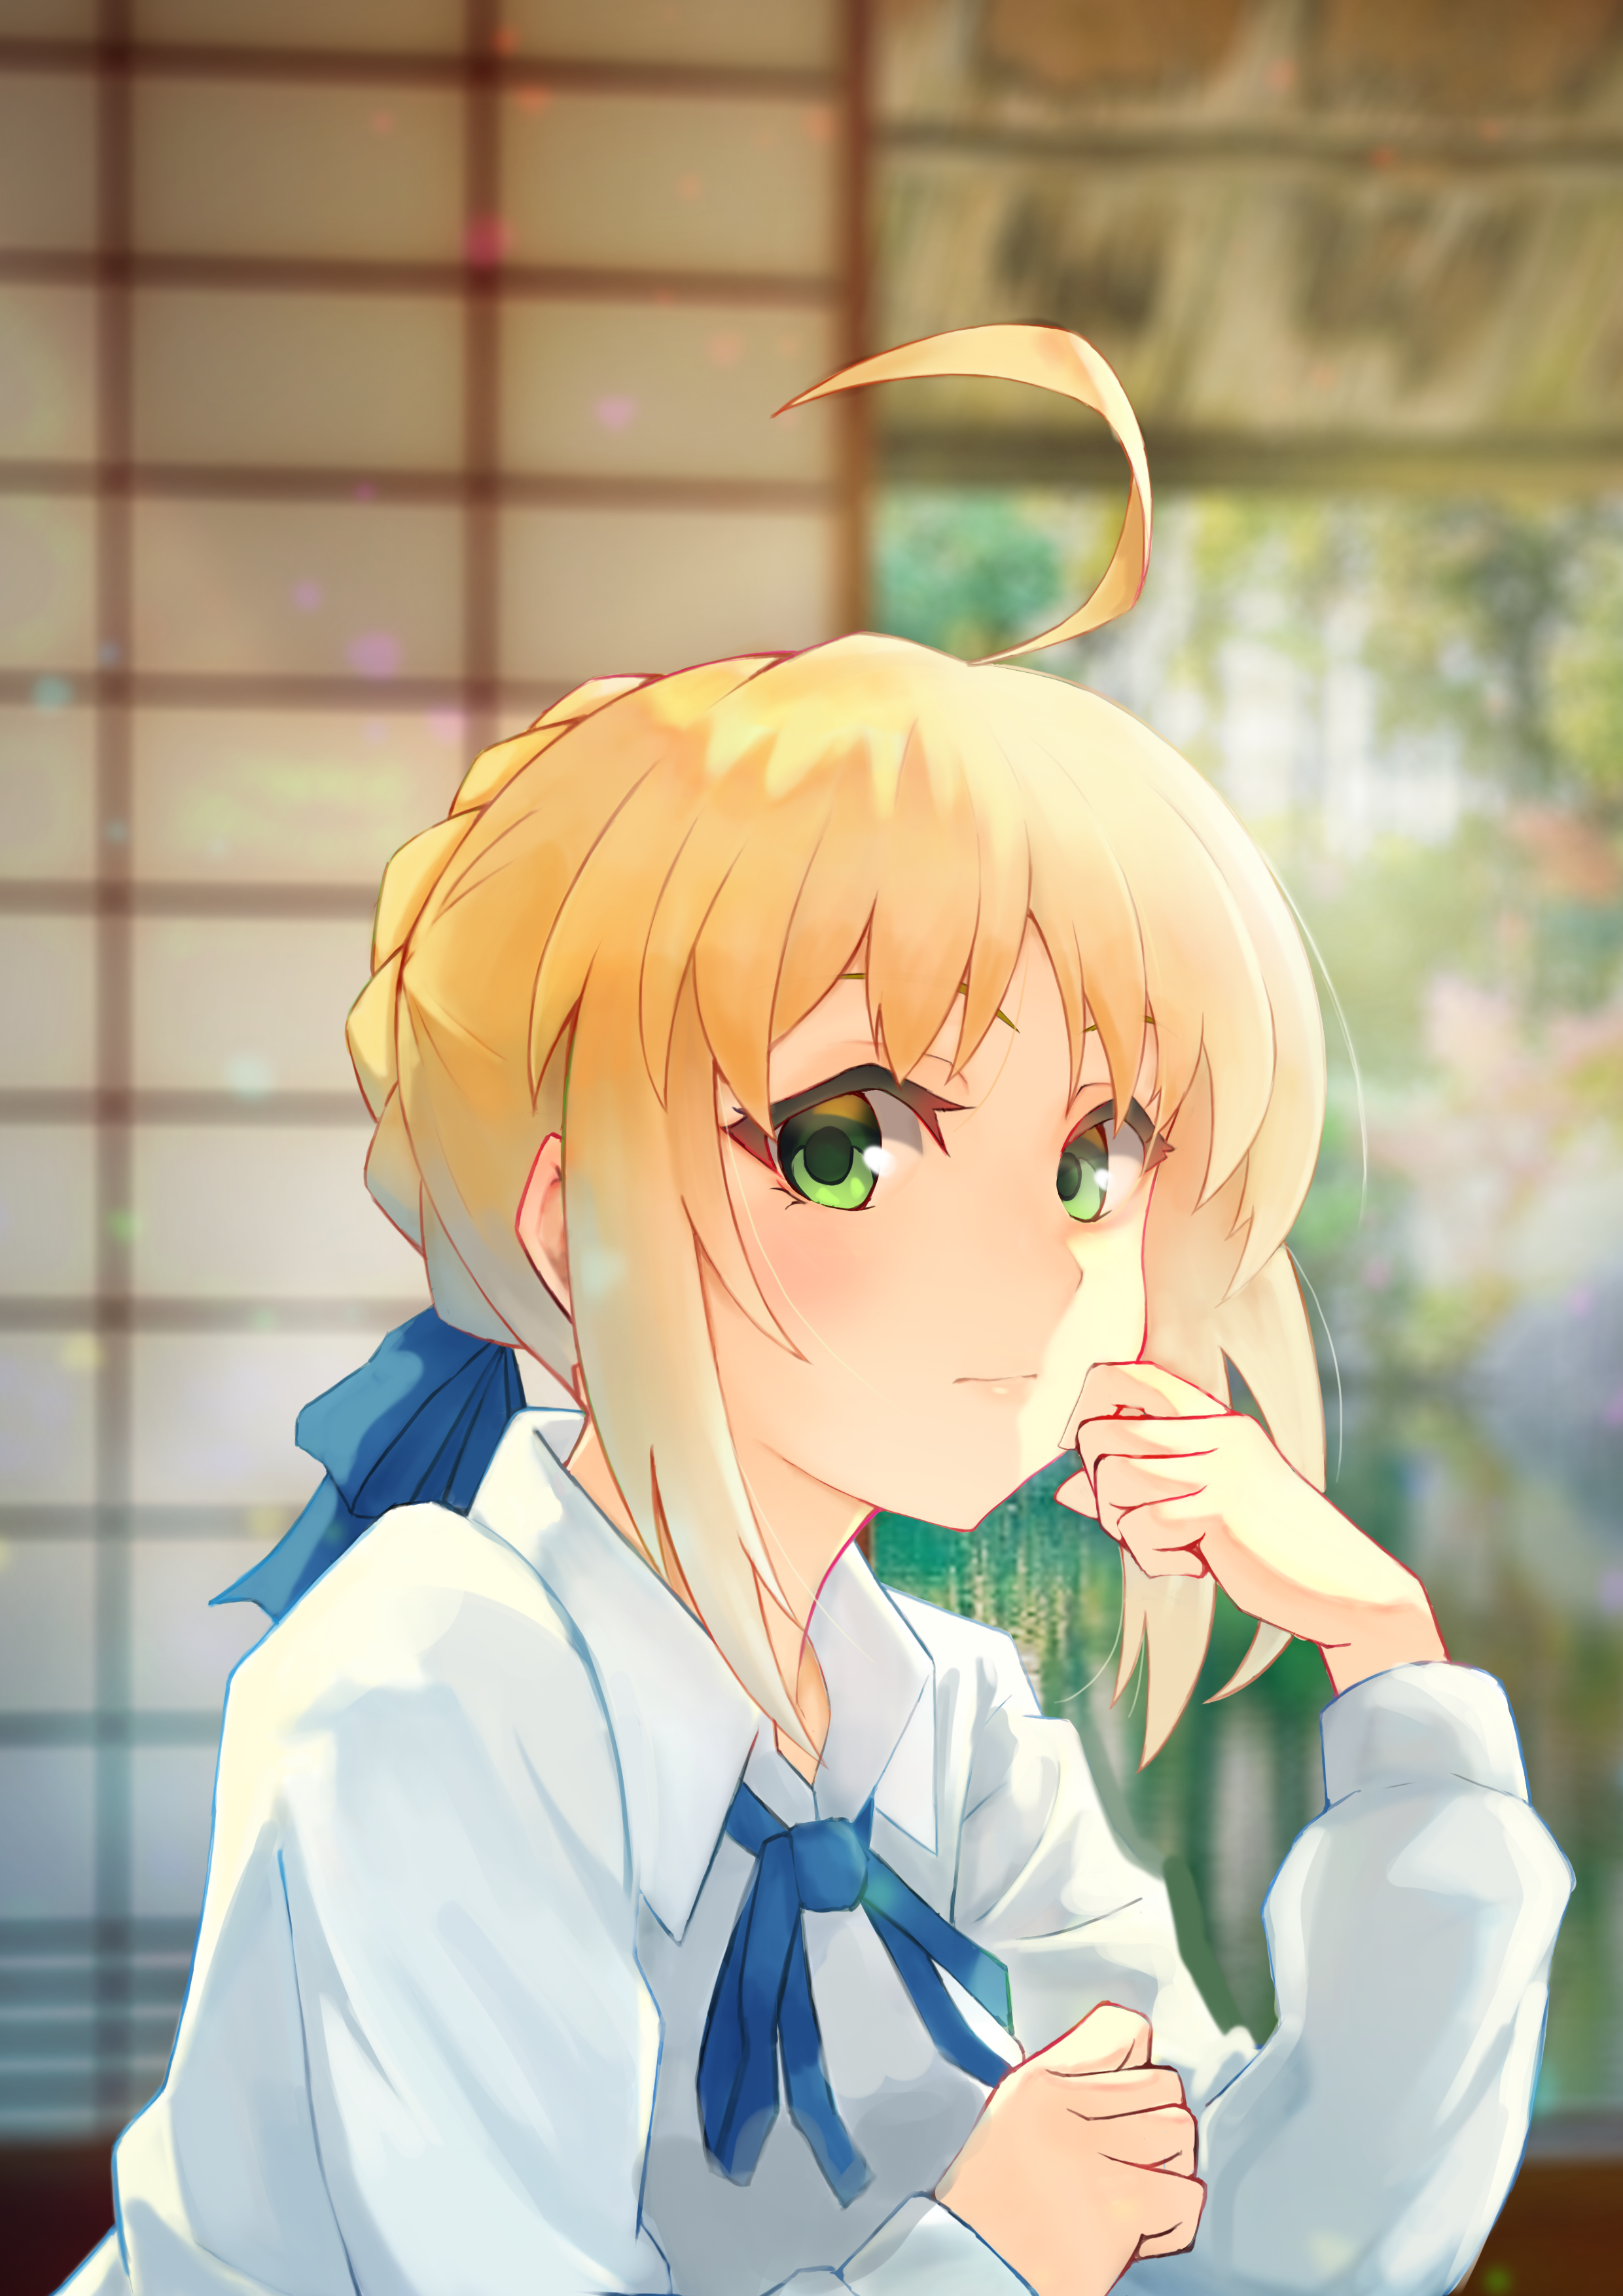 Anime 2480x3508 Fate series Fate/Stay Night anime girls braids Saber green eyes portrait display blushing hand on face looking at viewer blue ribbons fan art ahoge anime blonde smiling 2D artwork SOLar Artoria Pendragon